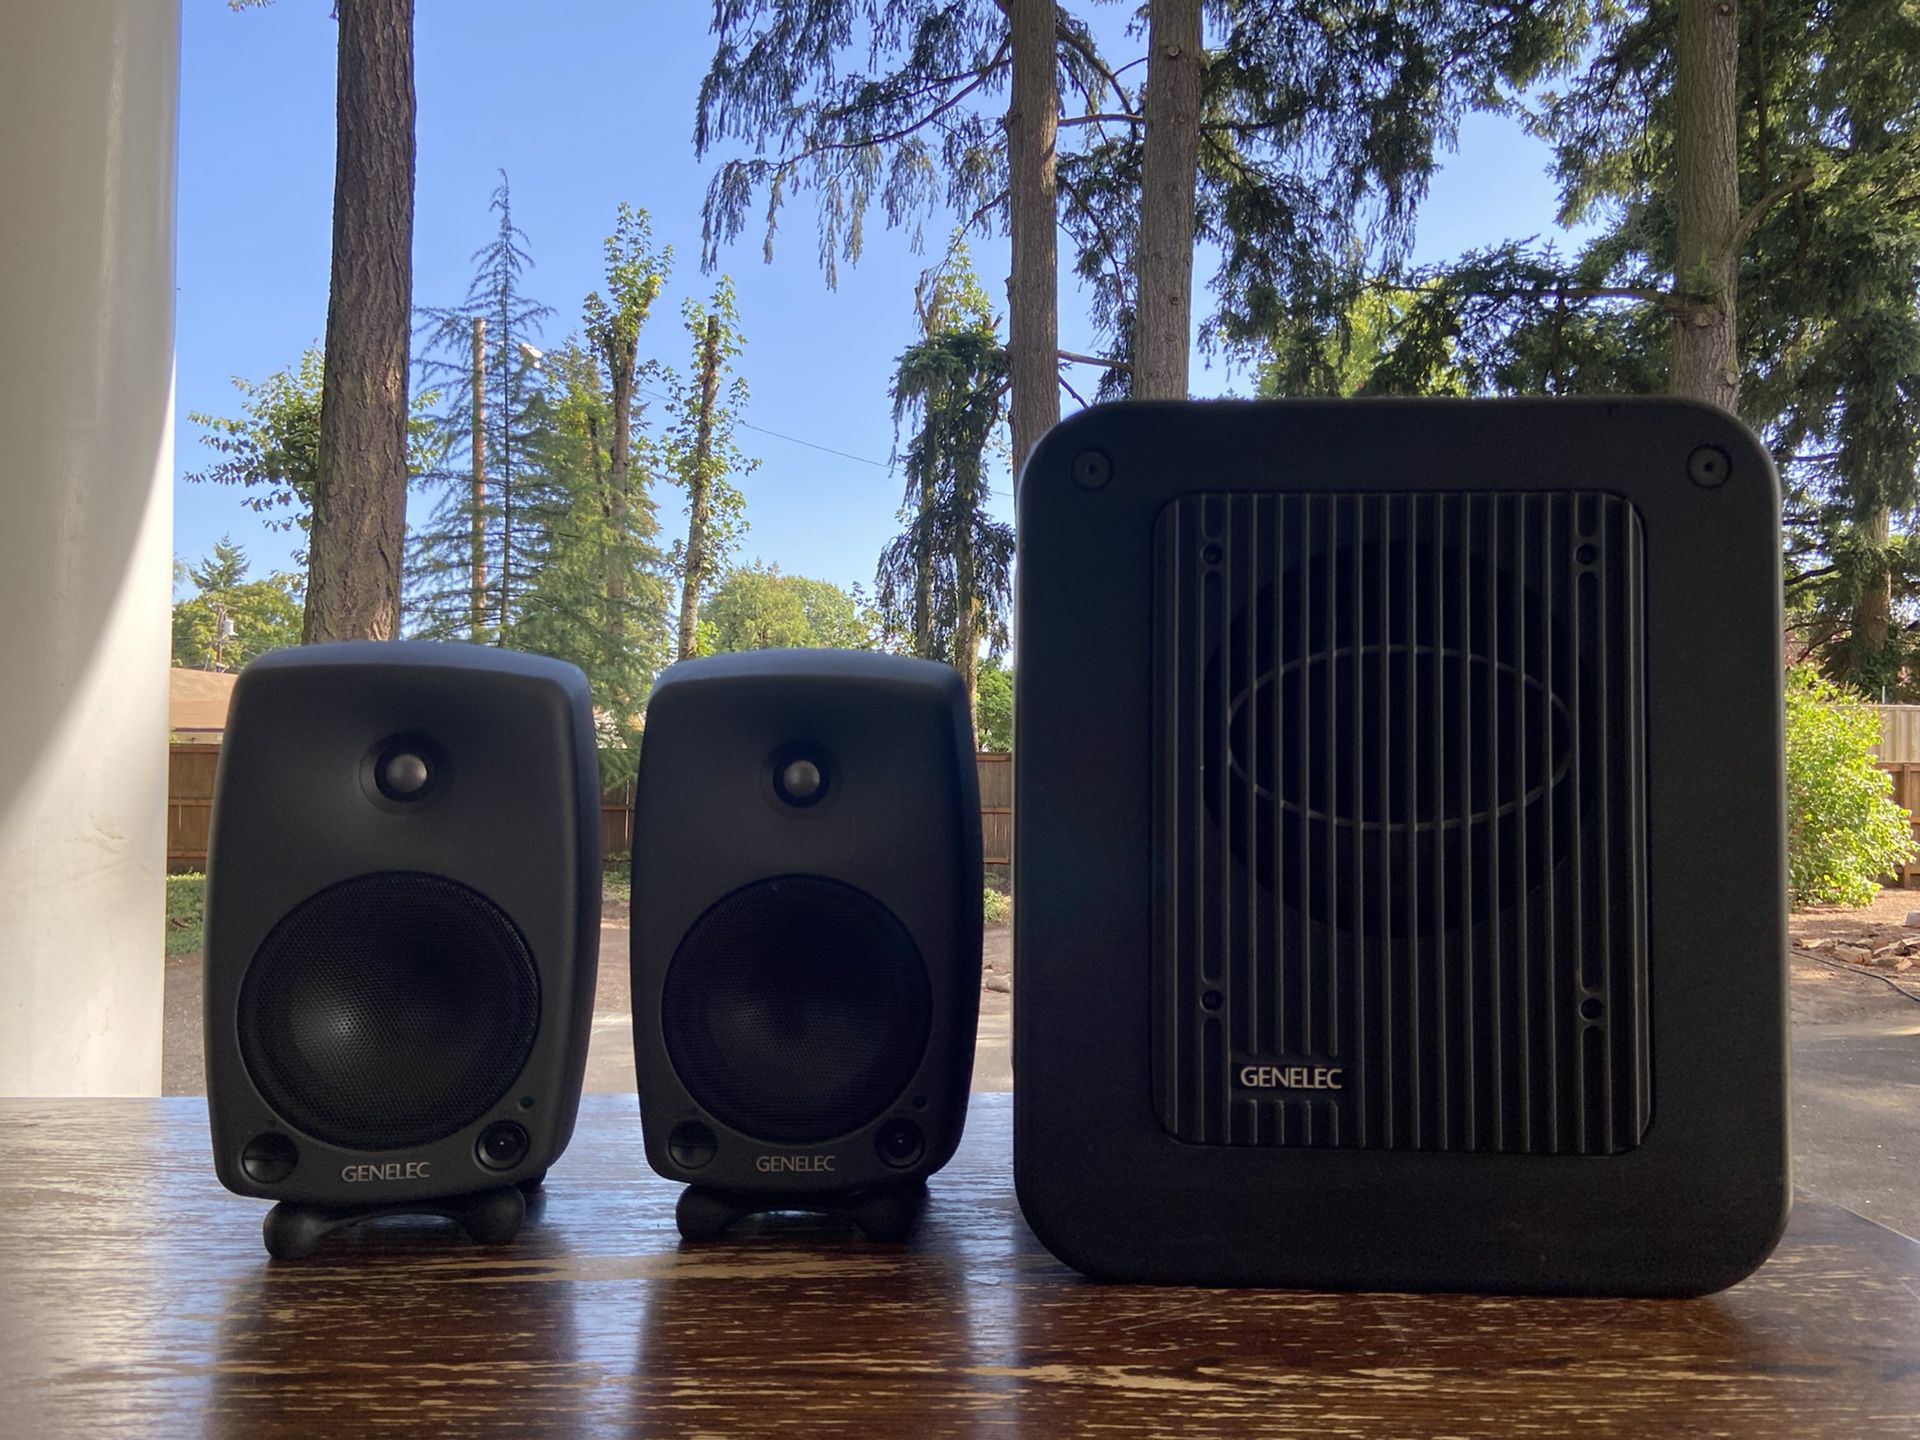 Genelec 8030a + 7050b pro audio reference monitors with sub